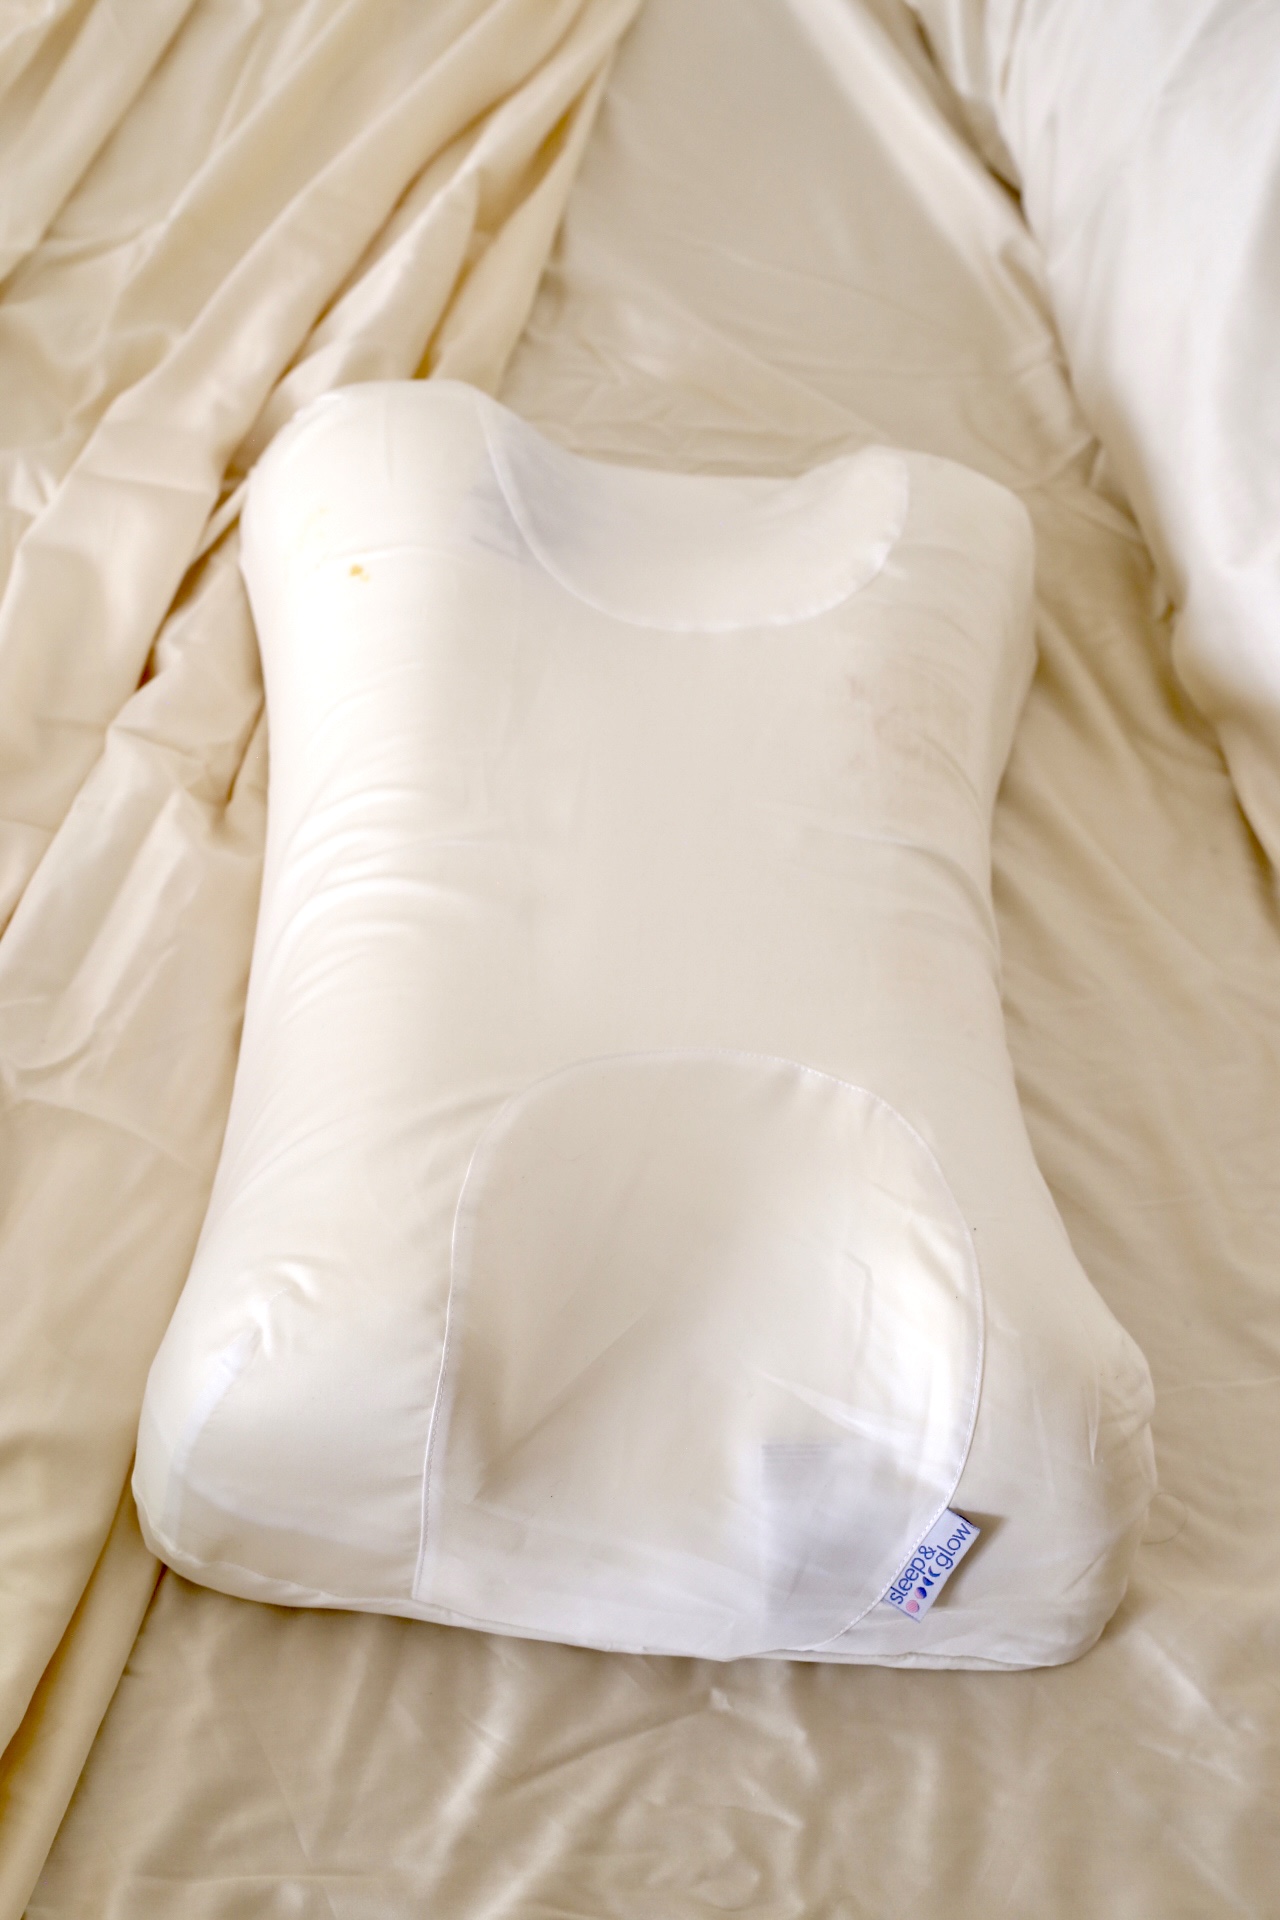 My Honest Review of Sleep & Glow Pillow: Yay or Nay? - ORGANIC BEAUTY LOVER